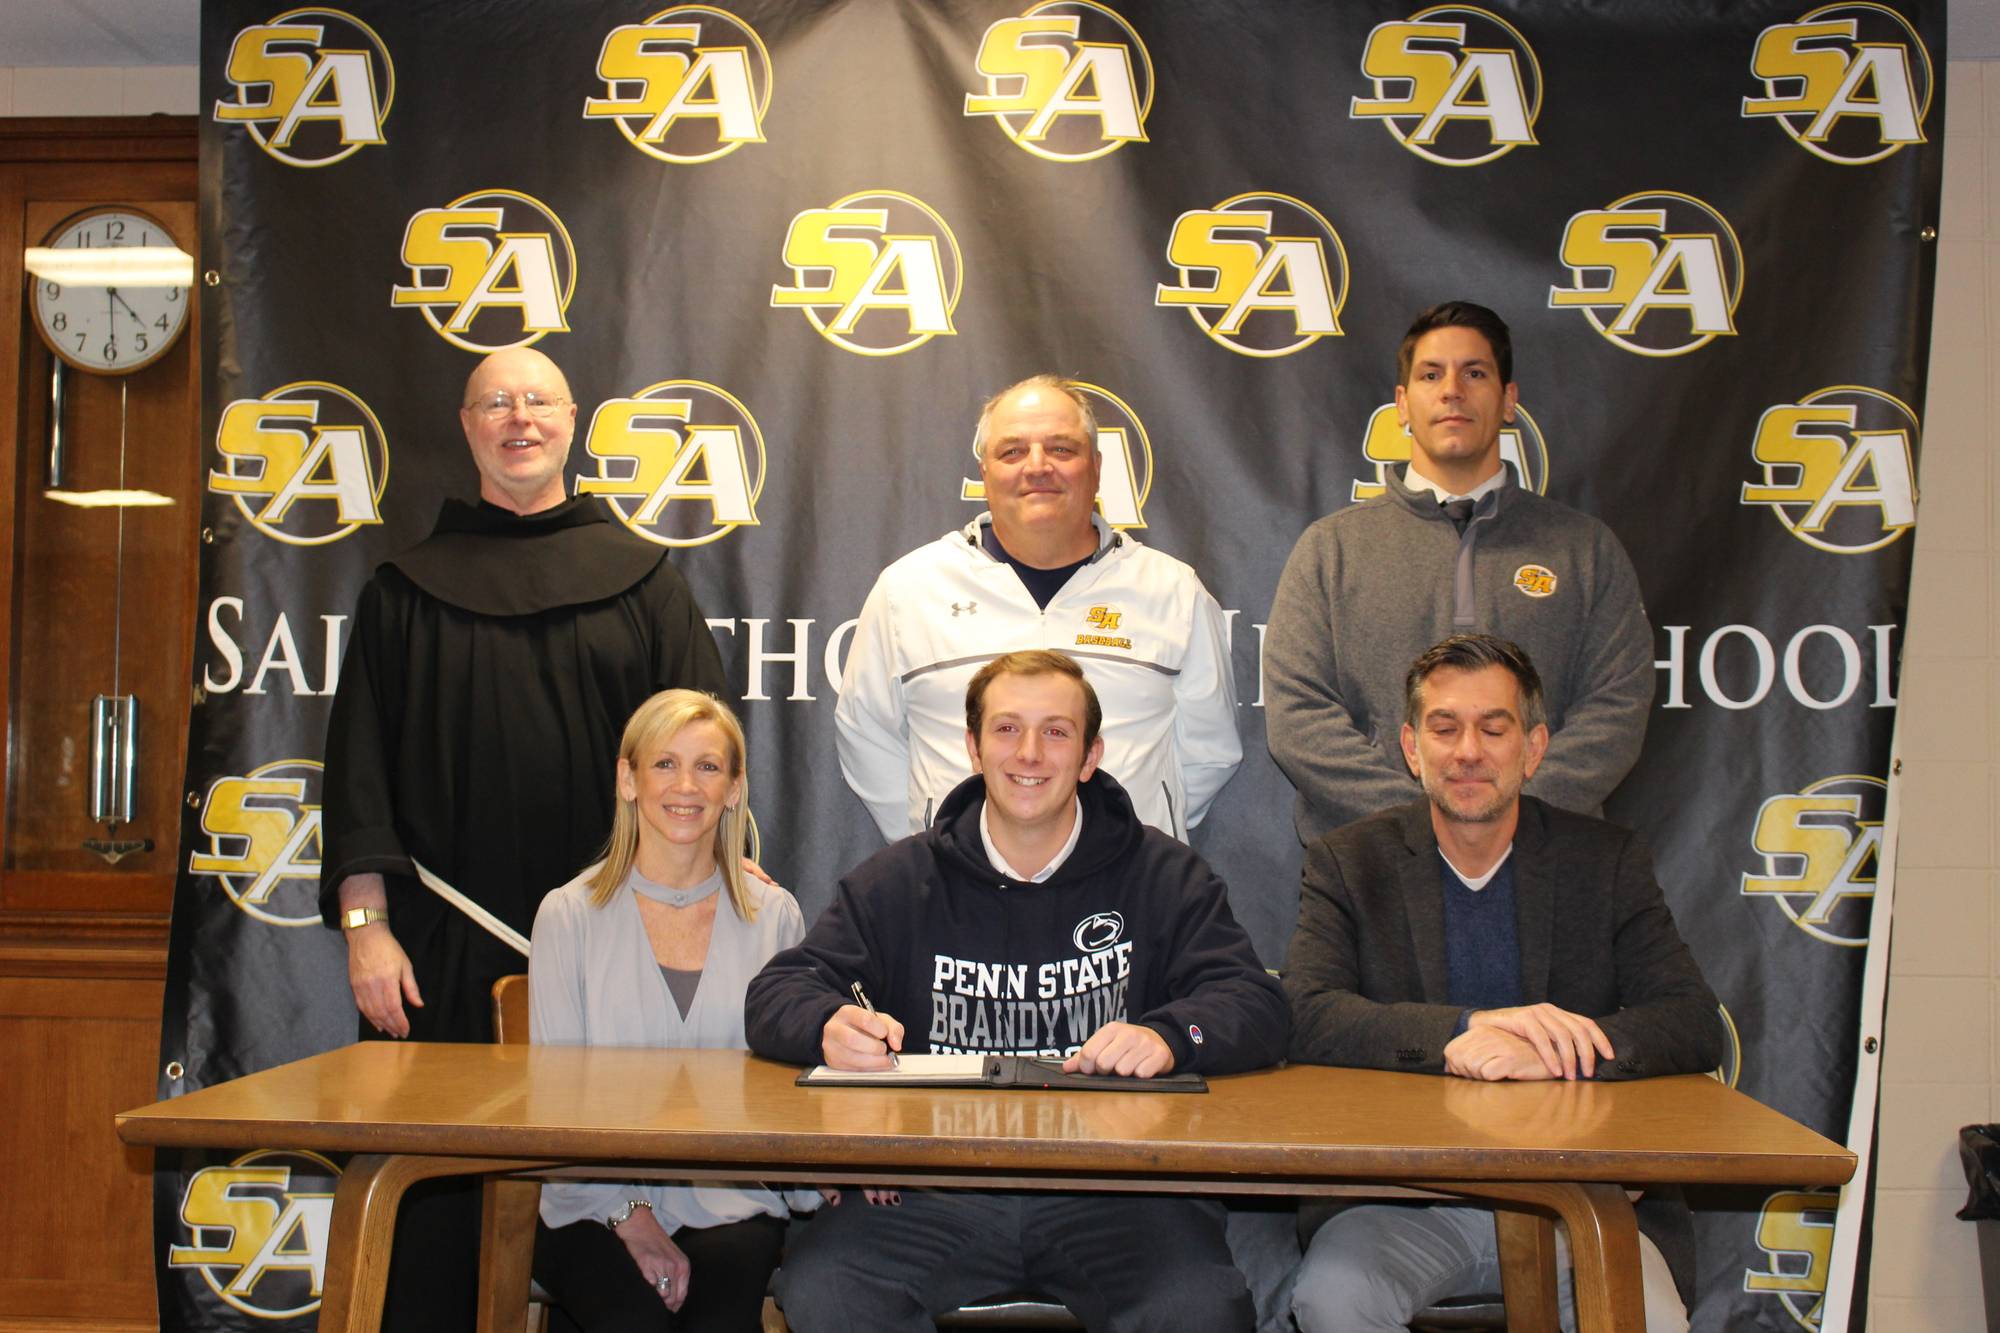 Congratulations Hayden Altimari; committed to Pennsylvania State University Brandywine to play Baseball